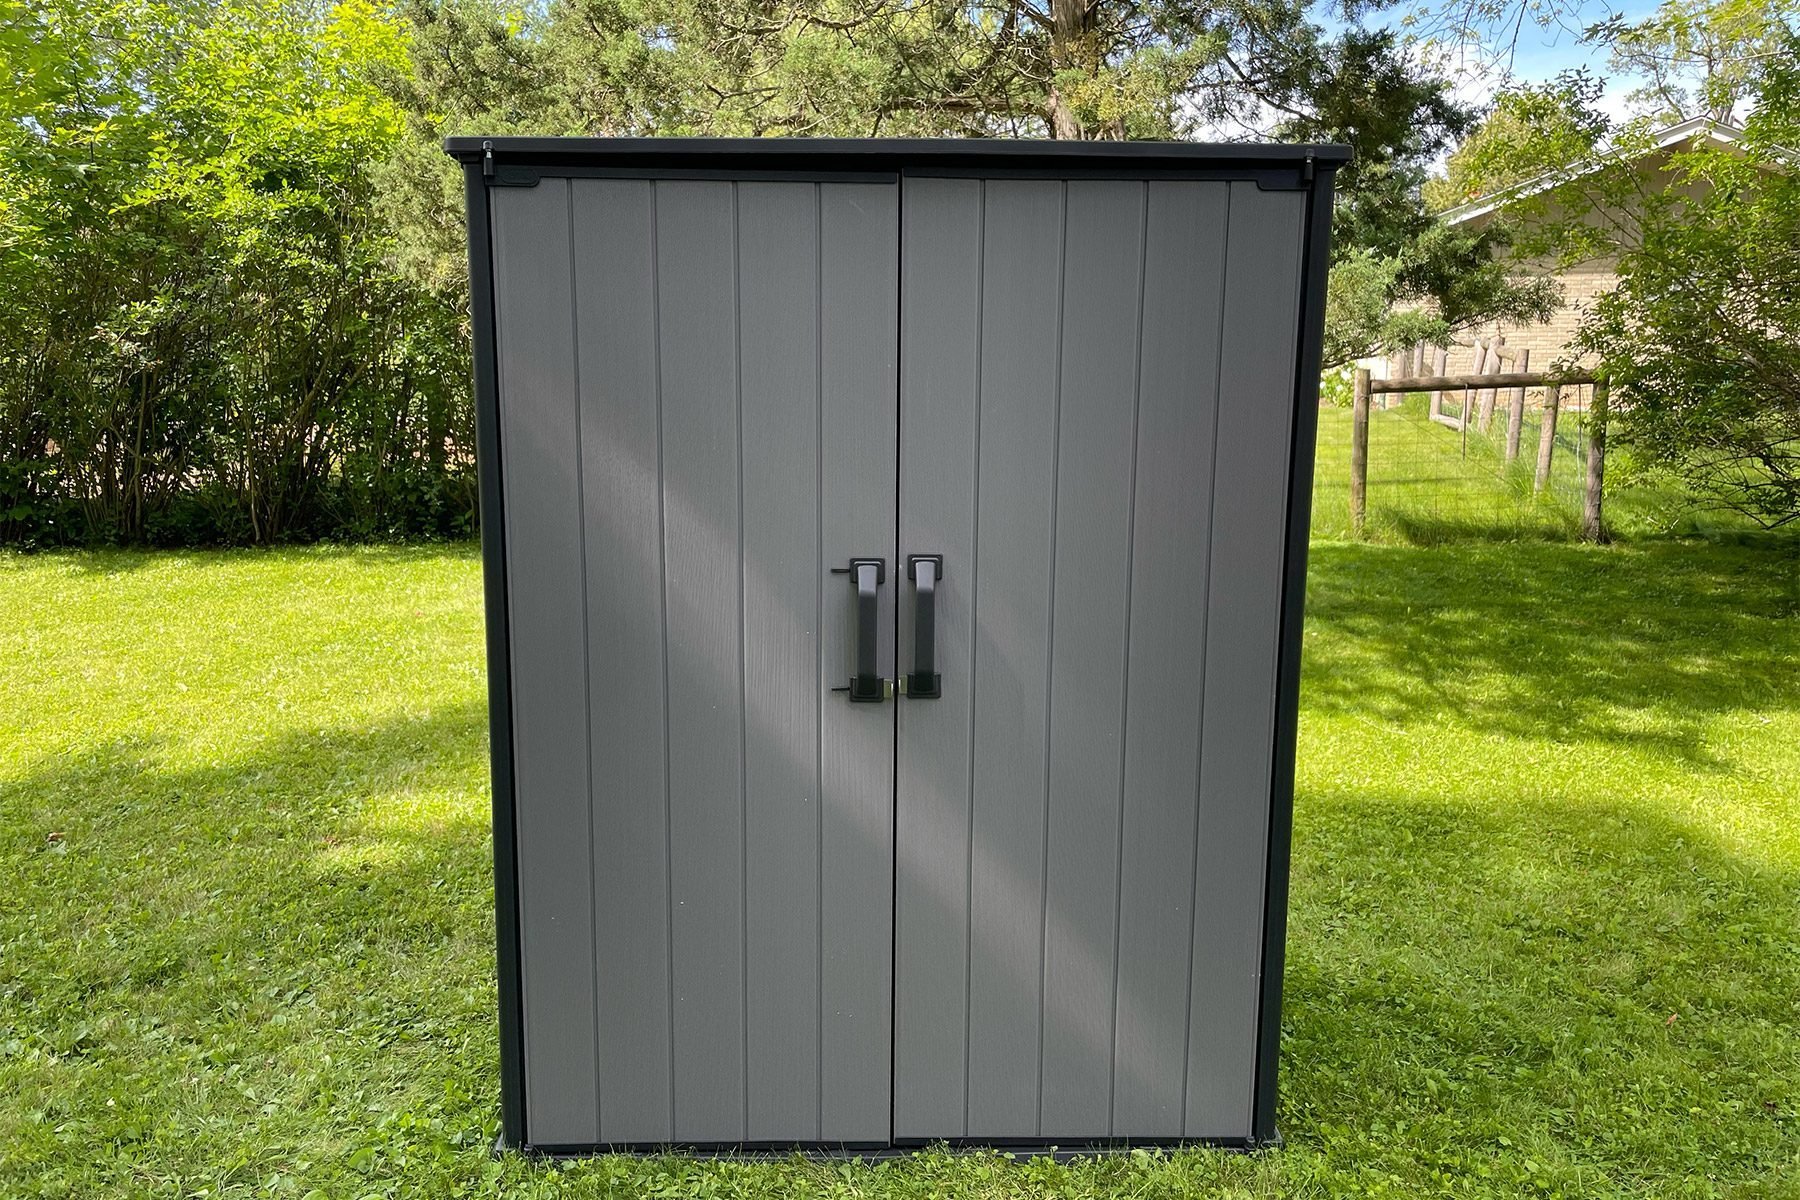 Keter Shed in backyard